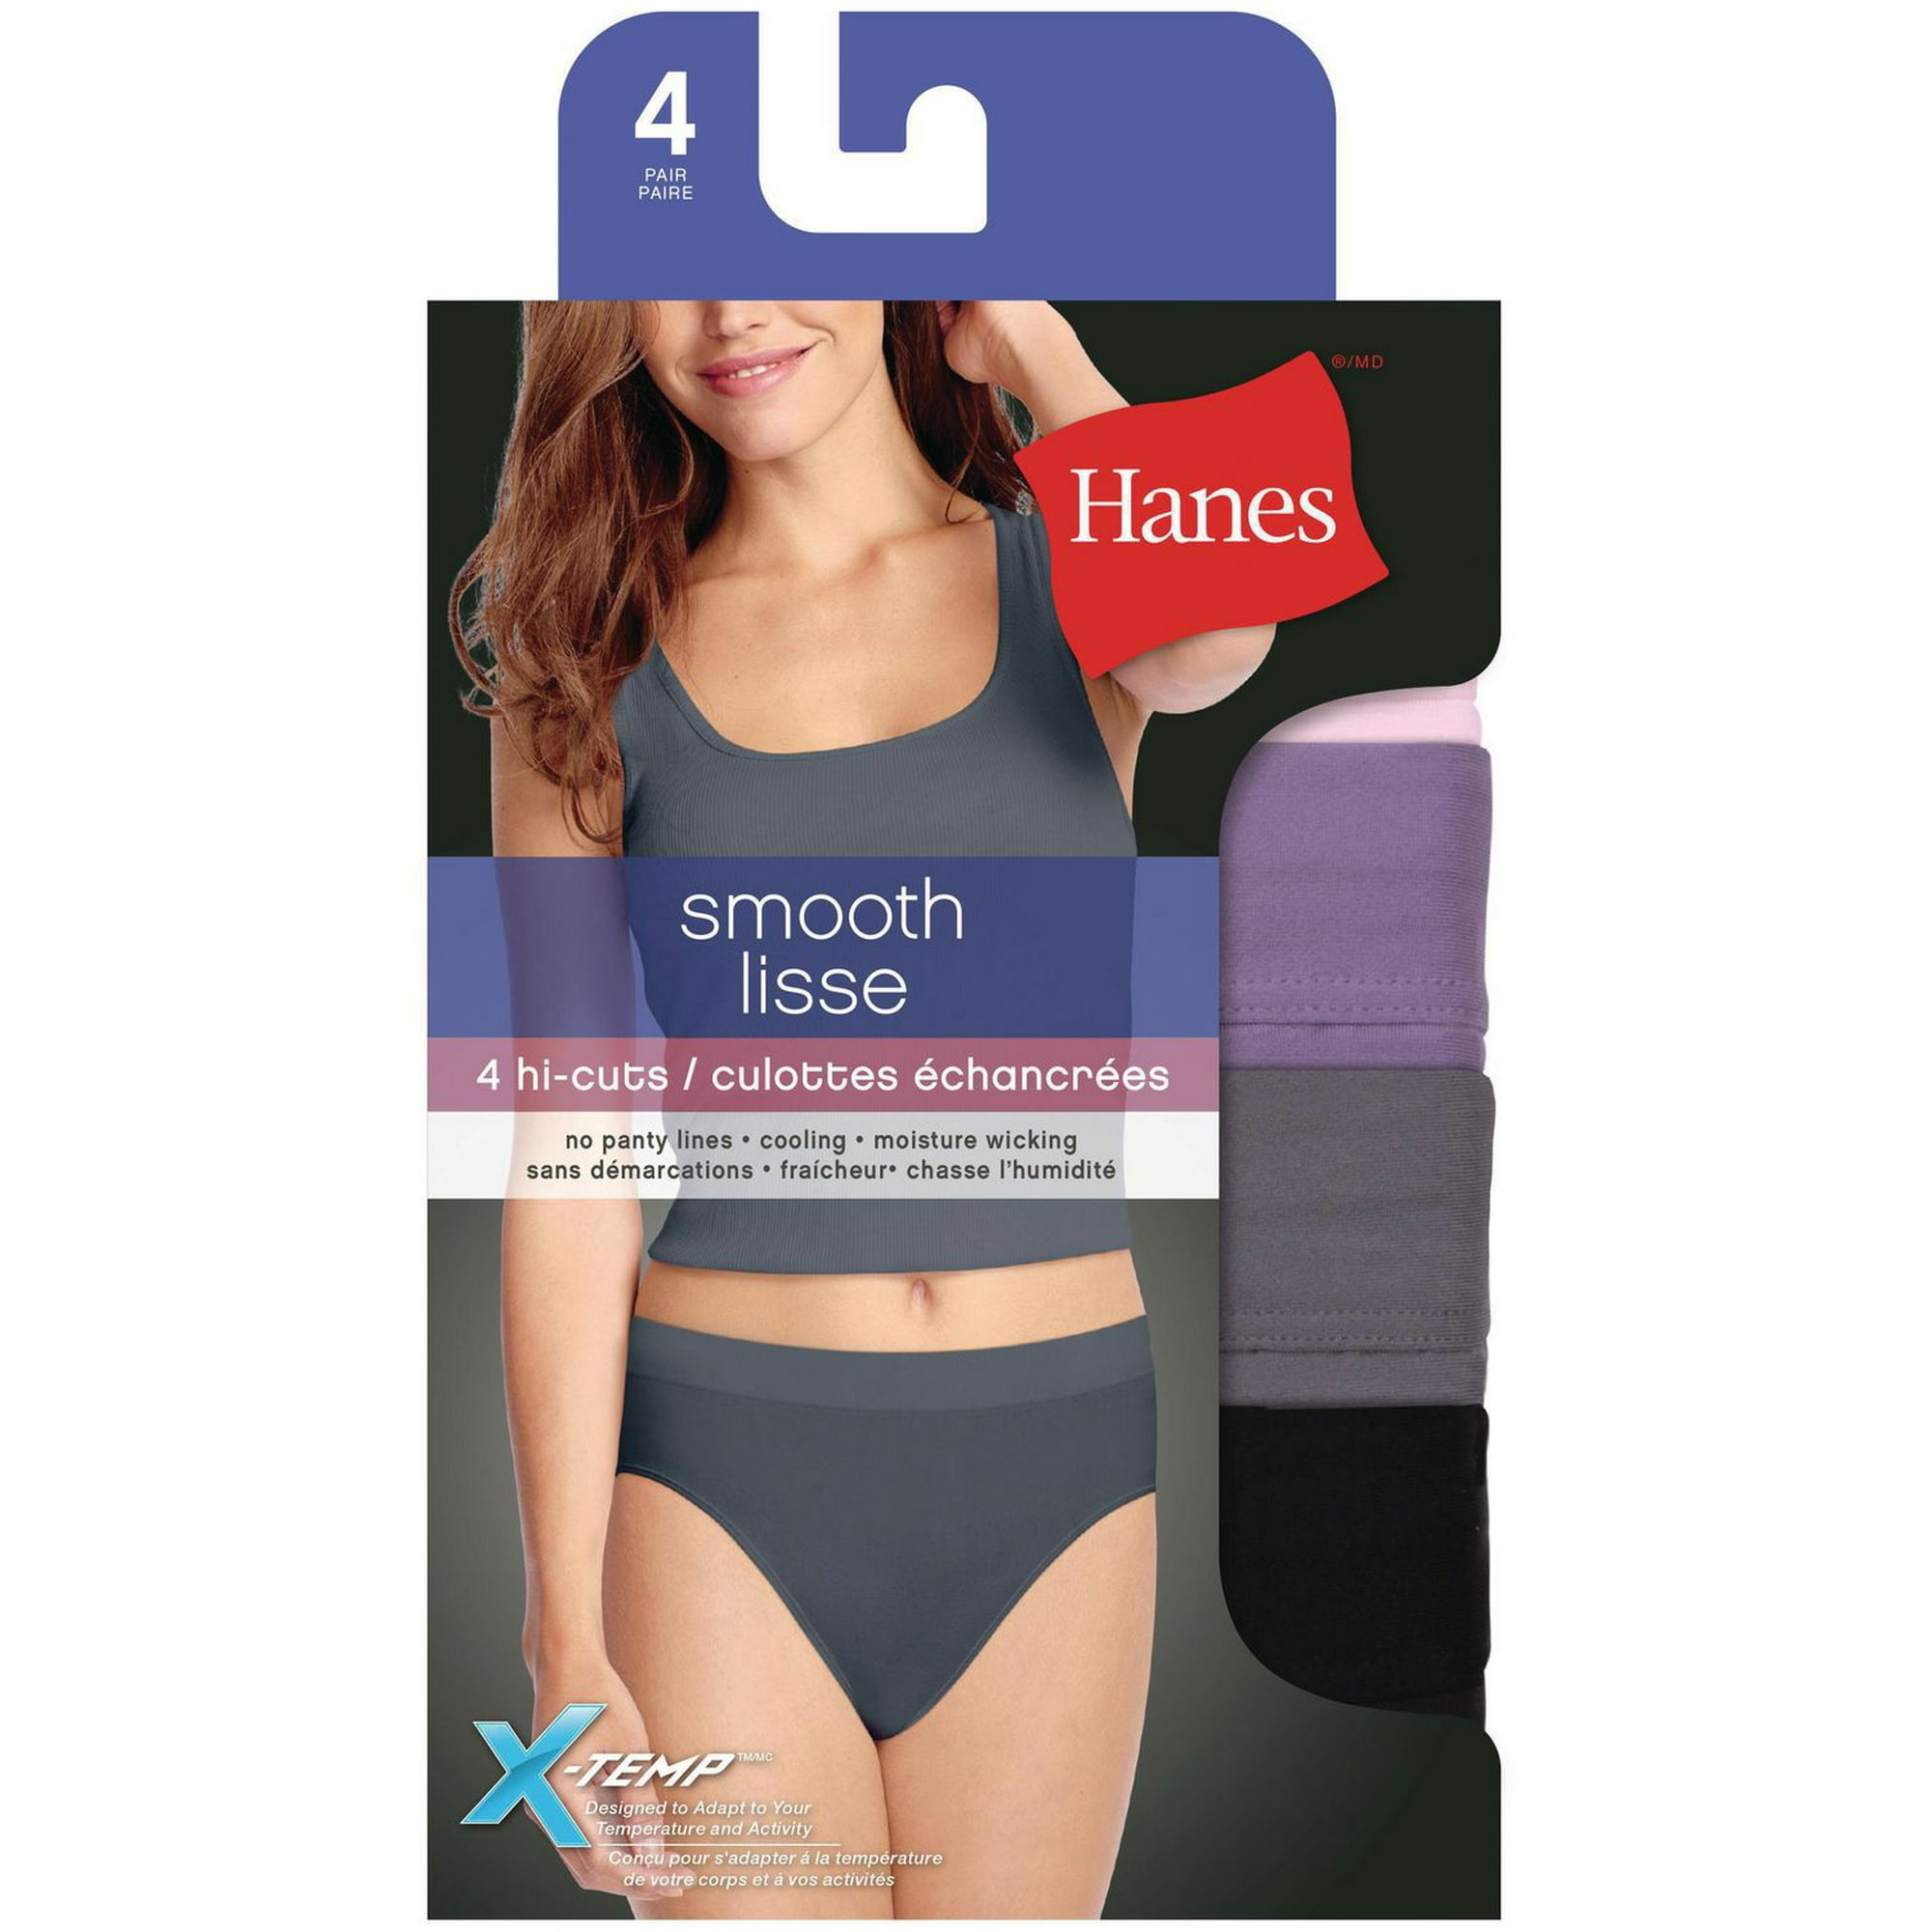 Hanes Cotton Tagless Hi-Cuts Value Pack, Size 7, 10 count - The Fresh Grocer